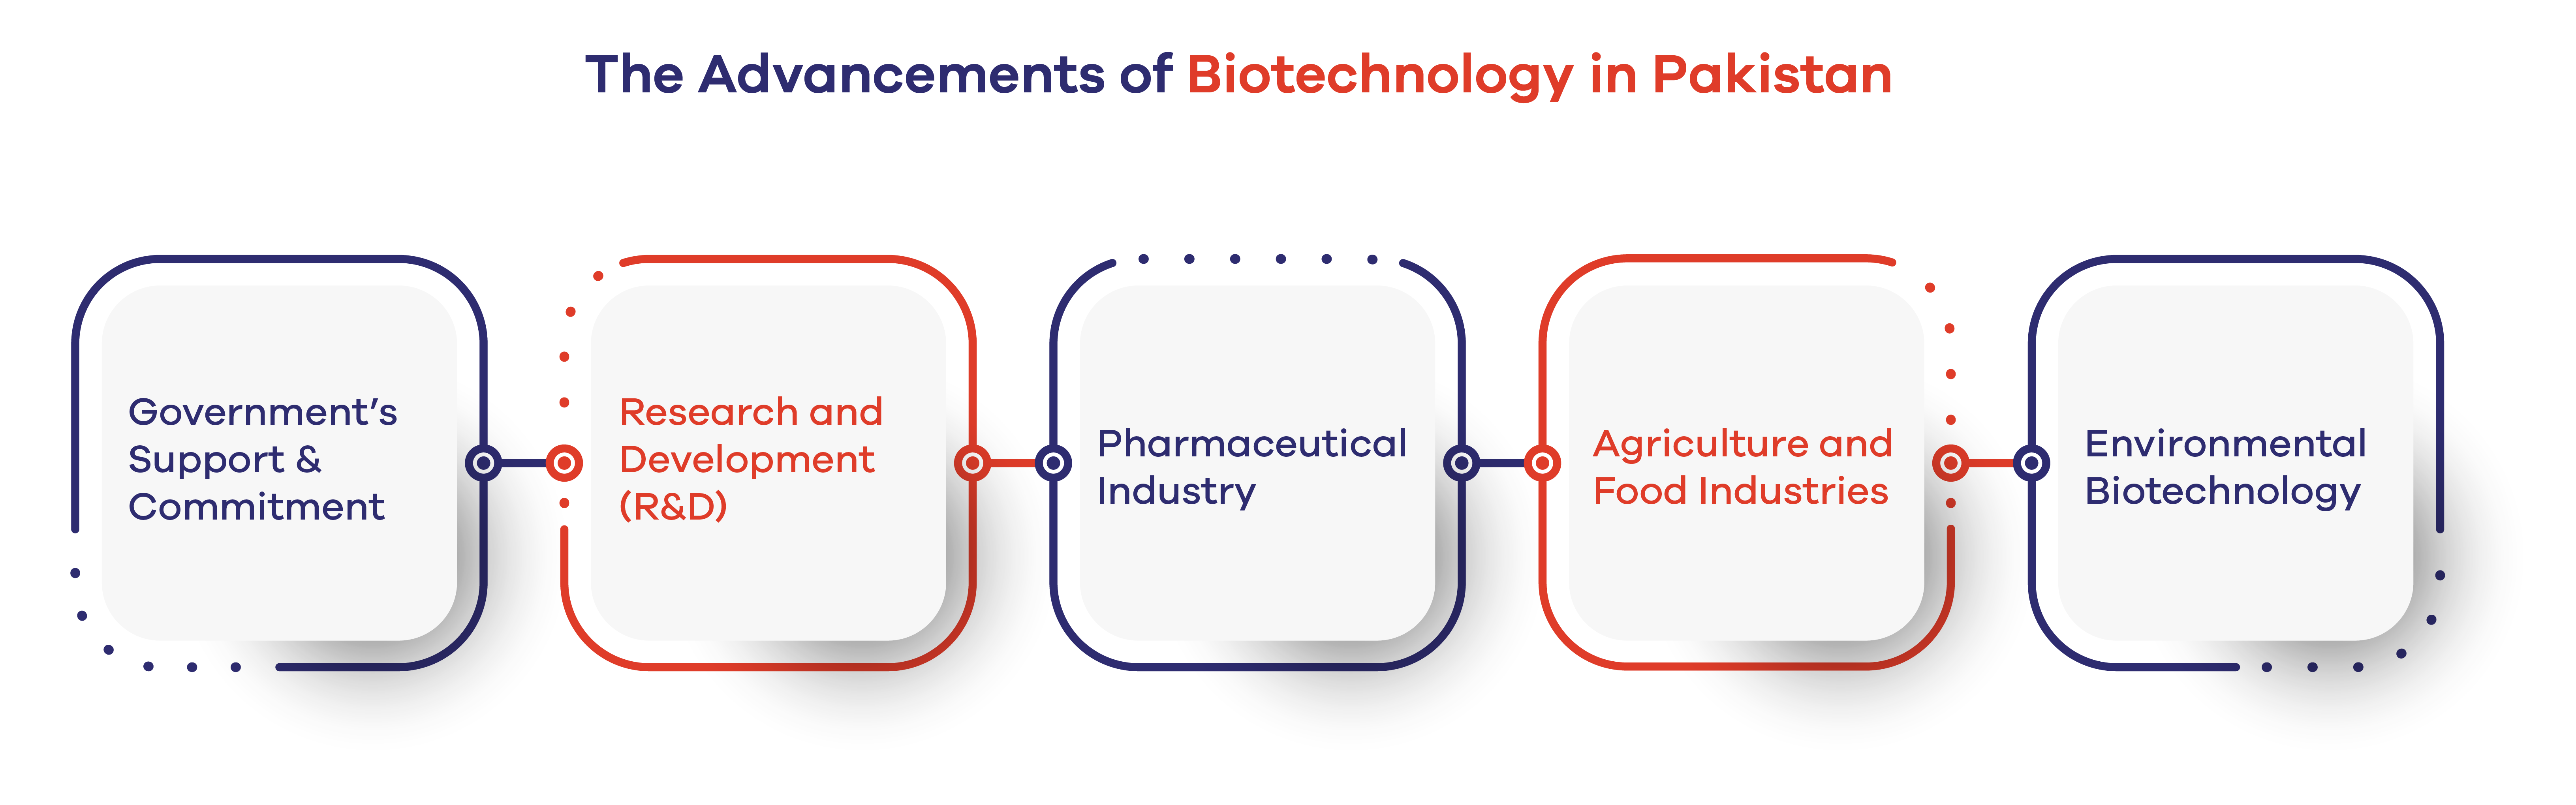 The Advancements of Biotechnology in Pakistan 